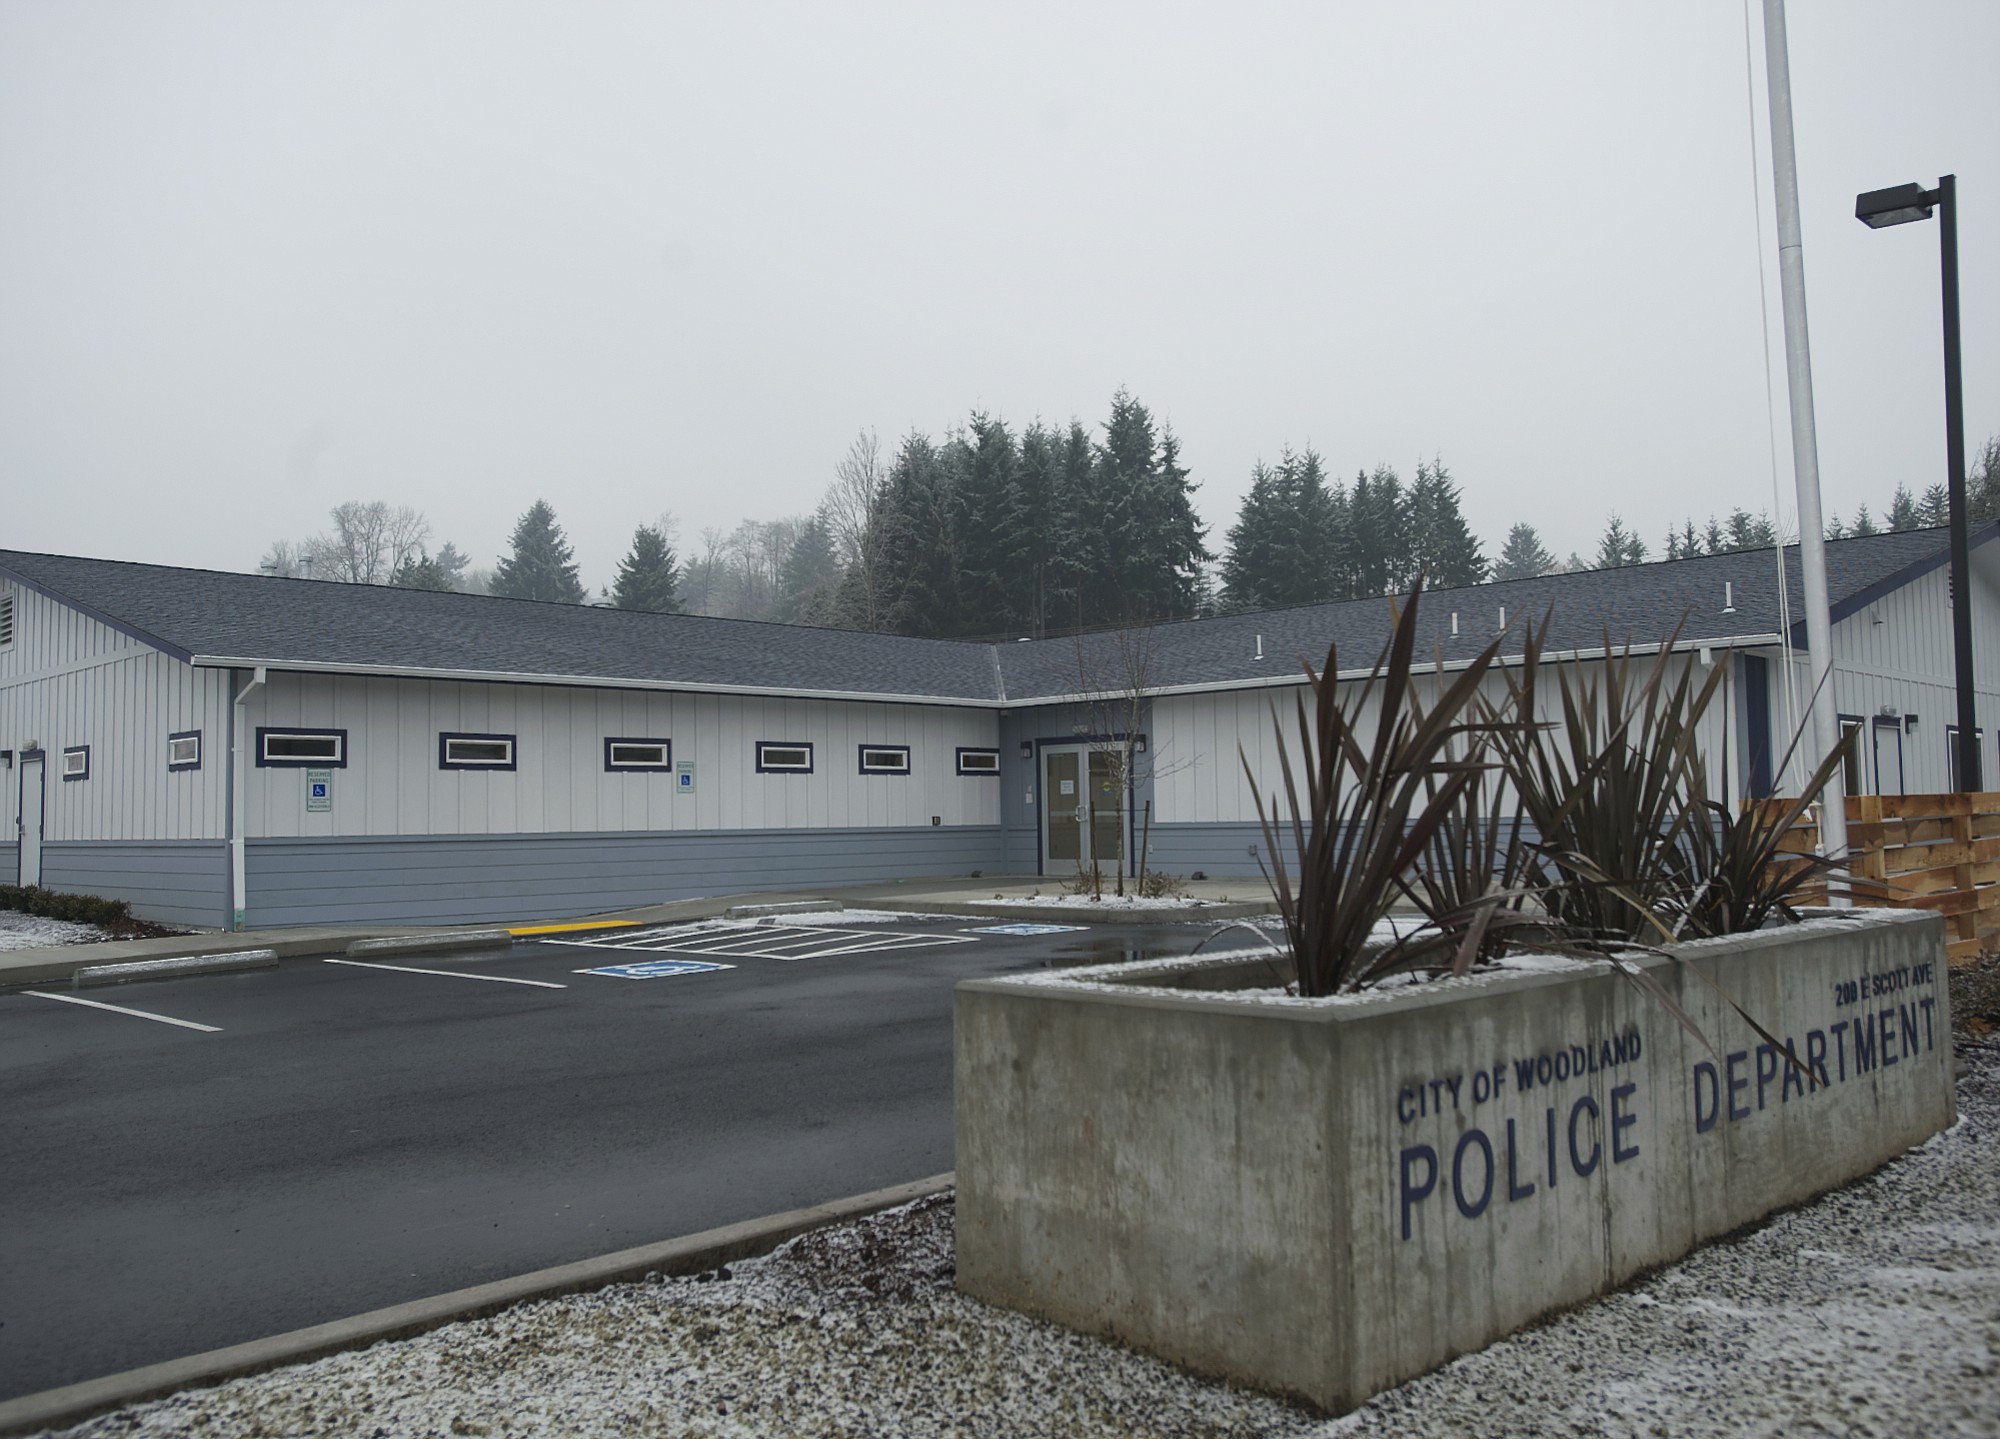 The Woodland Police station opened in 2013.